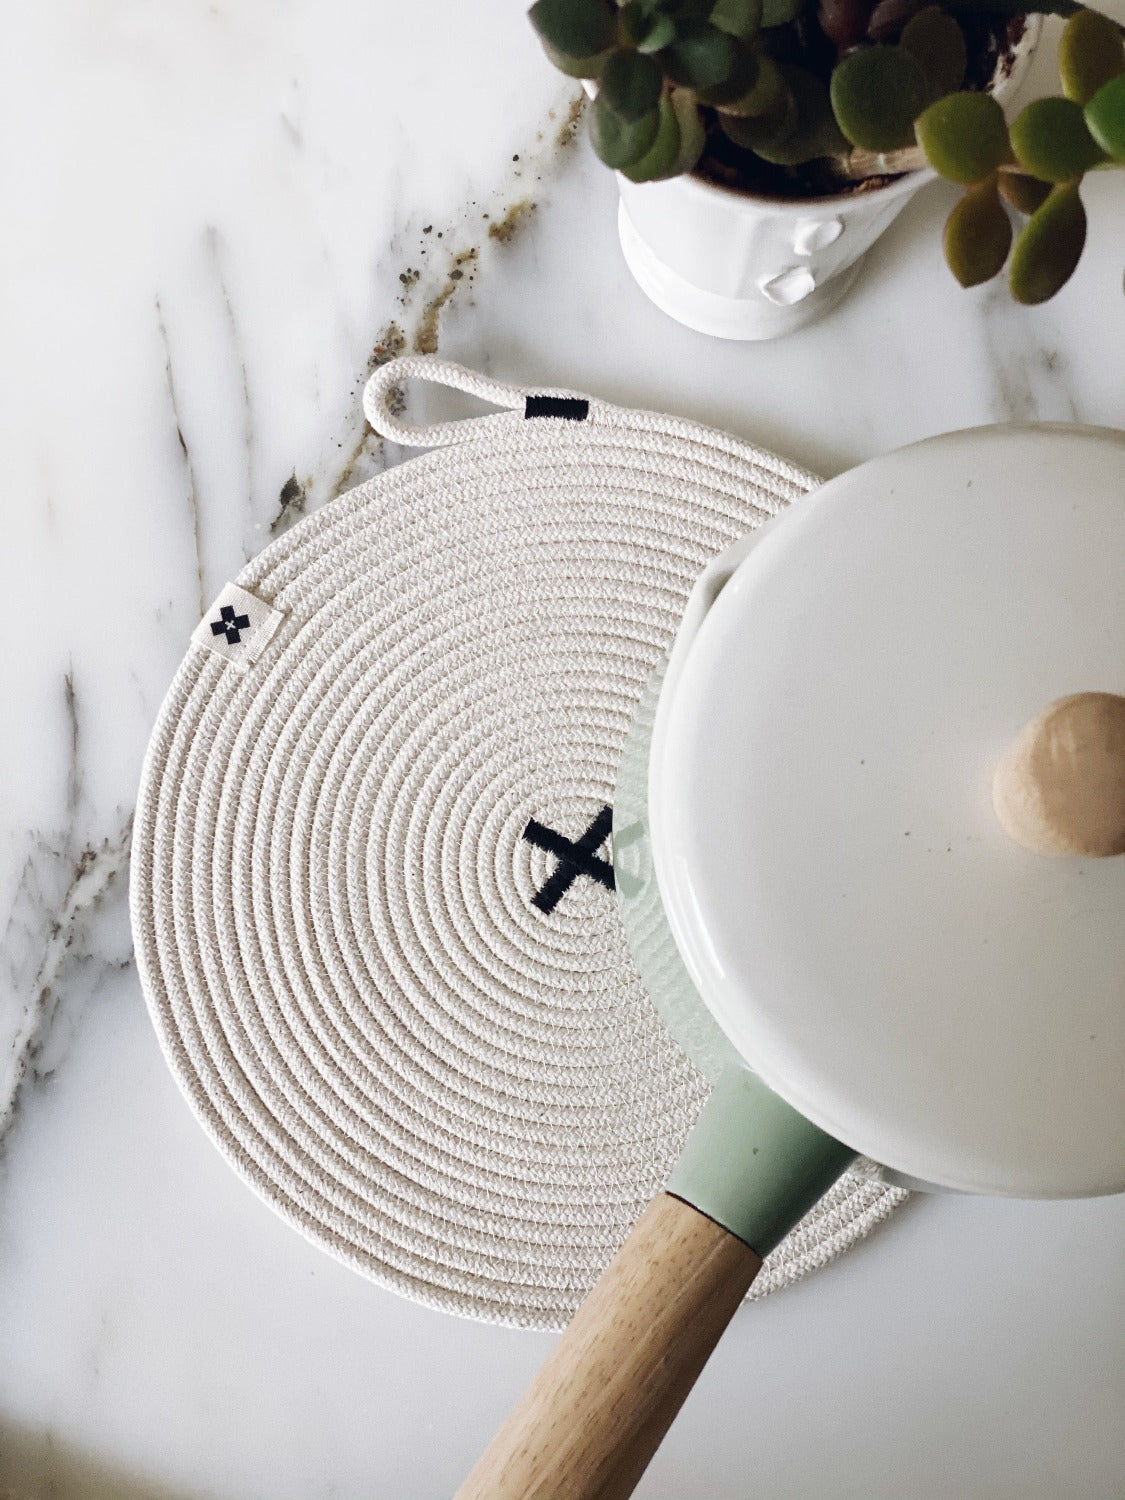 Aerial product image of Large Rope Trivet | Black. On a white marble surface there is a large trivet with a white pot on the edge. The pot has a lid and a wood handle. Above the trivet is a small white planter with a green plant.